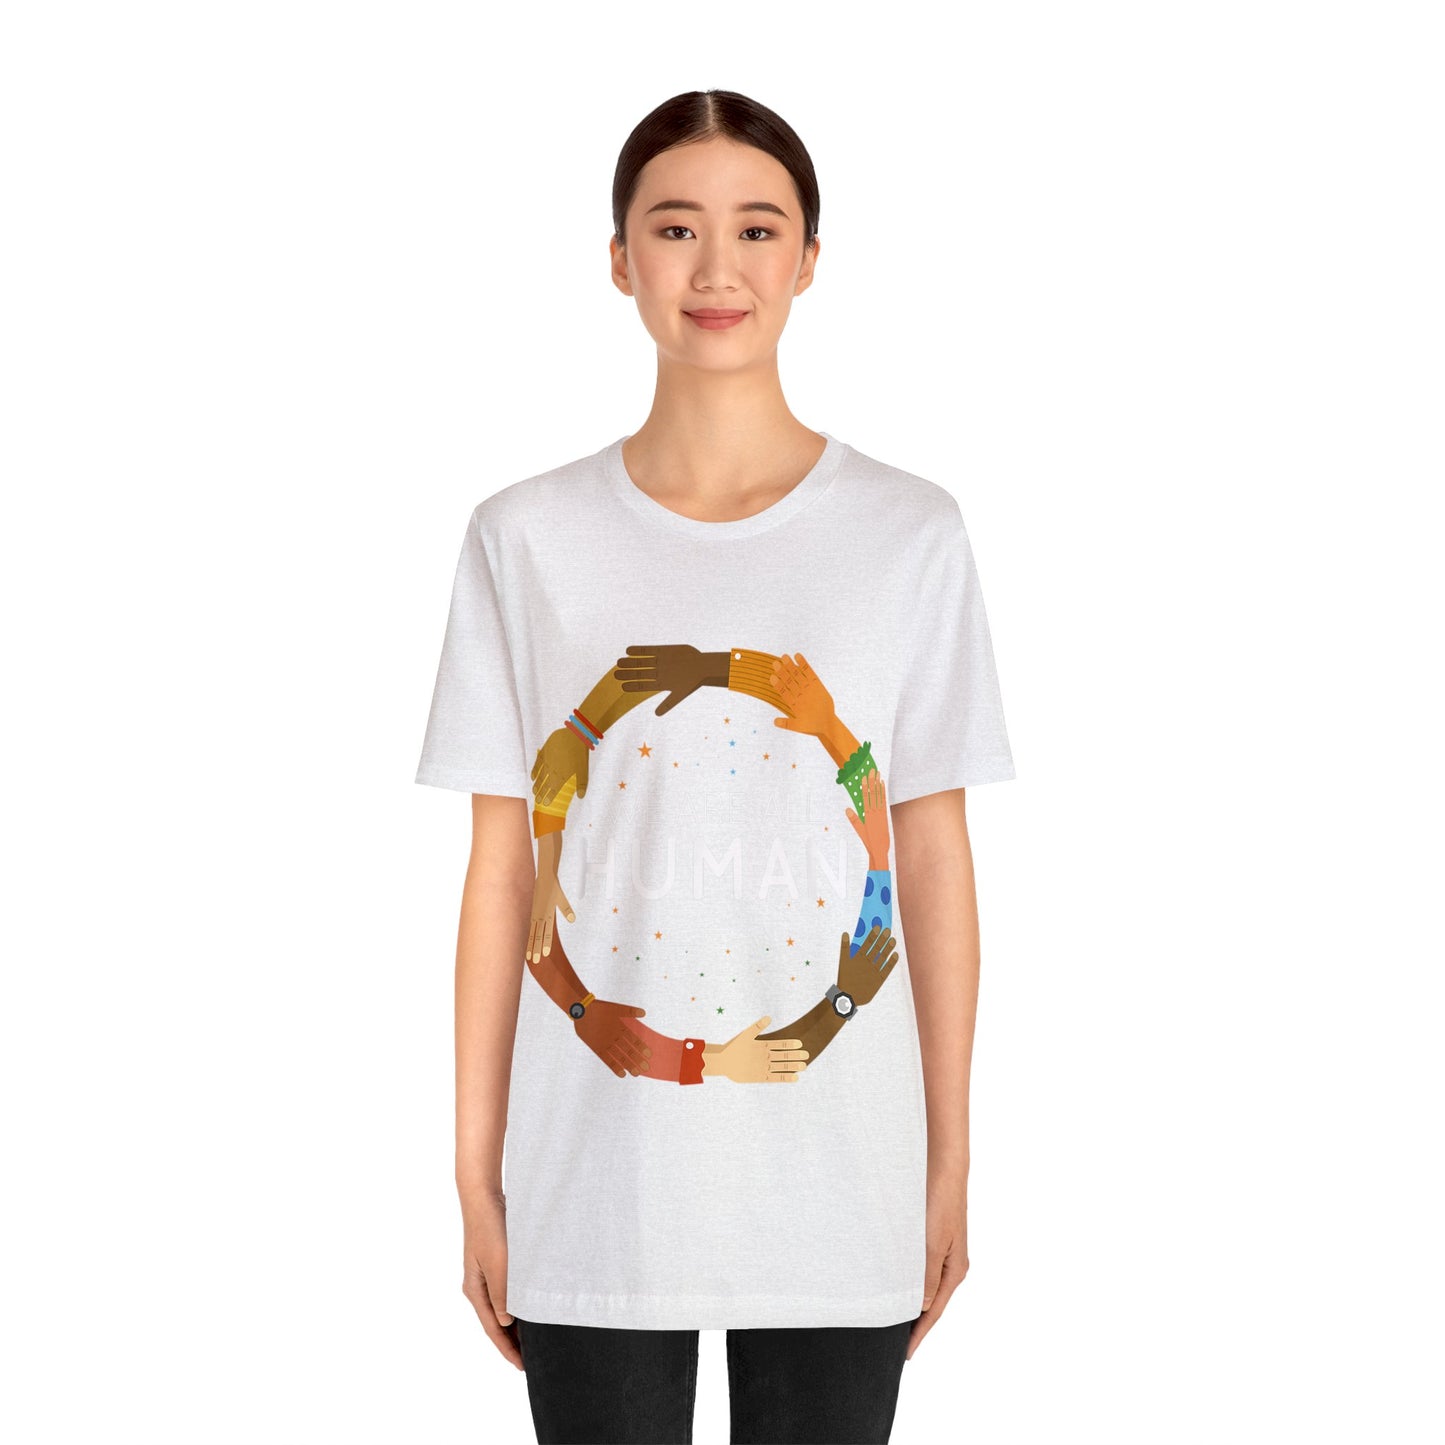 We All Are Human - Bella Canvas -  Unisex Jersey Short Sleeve Tee